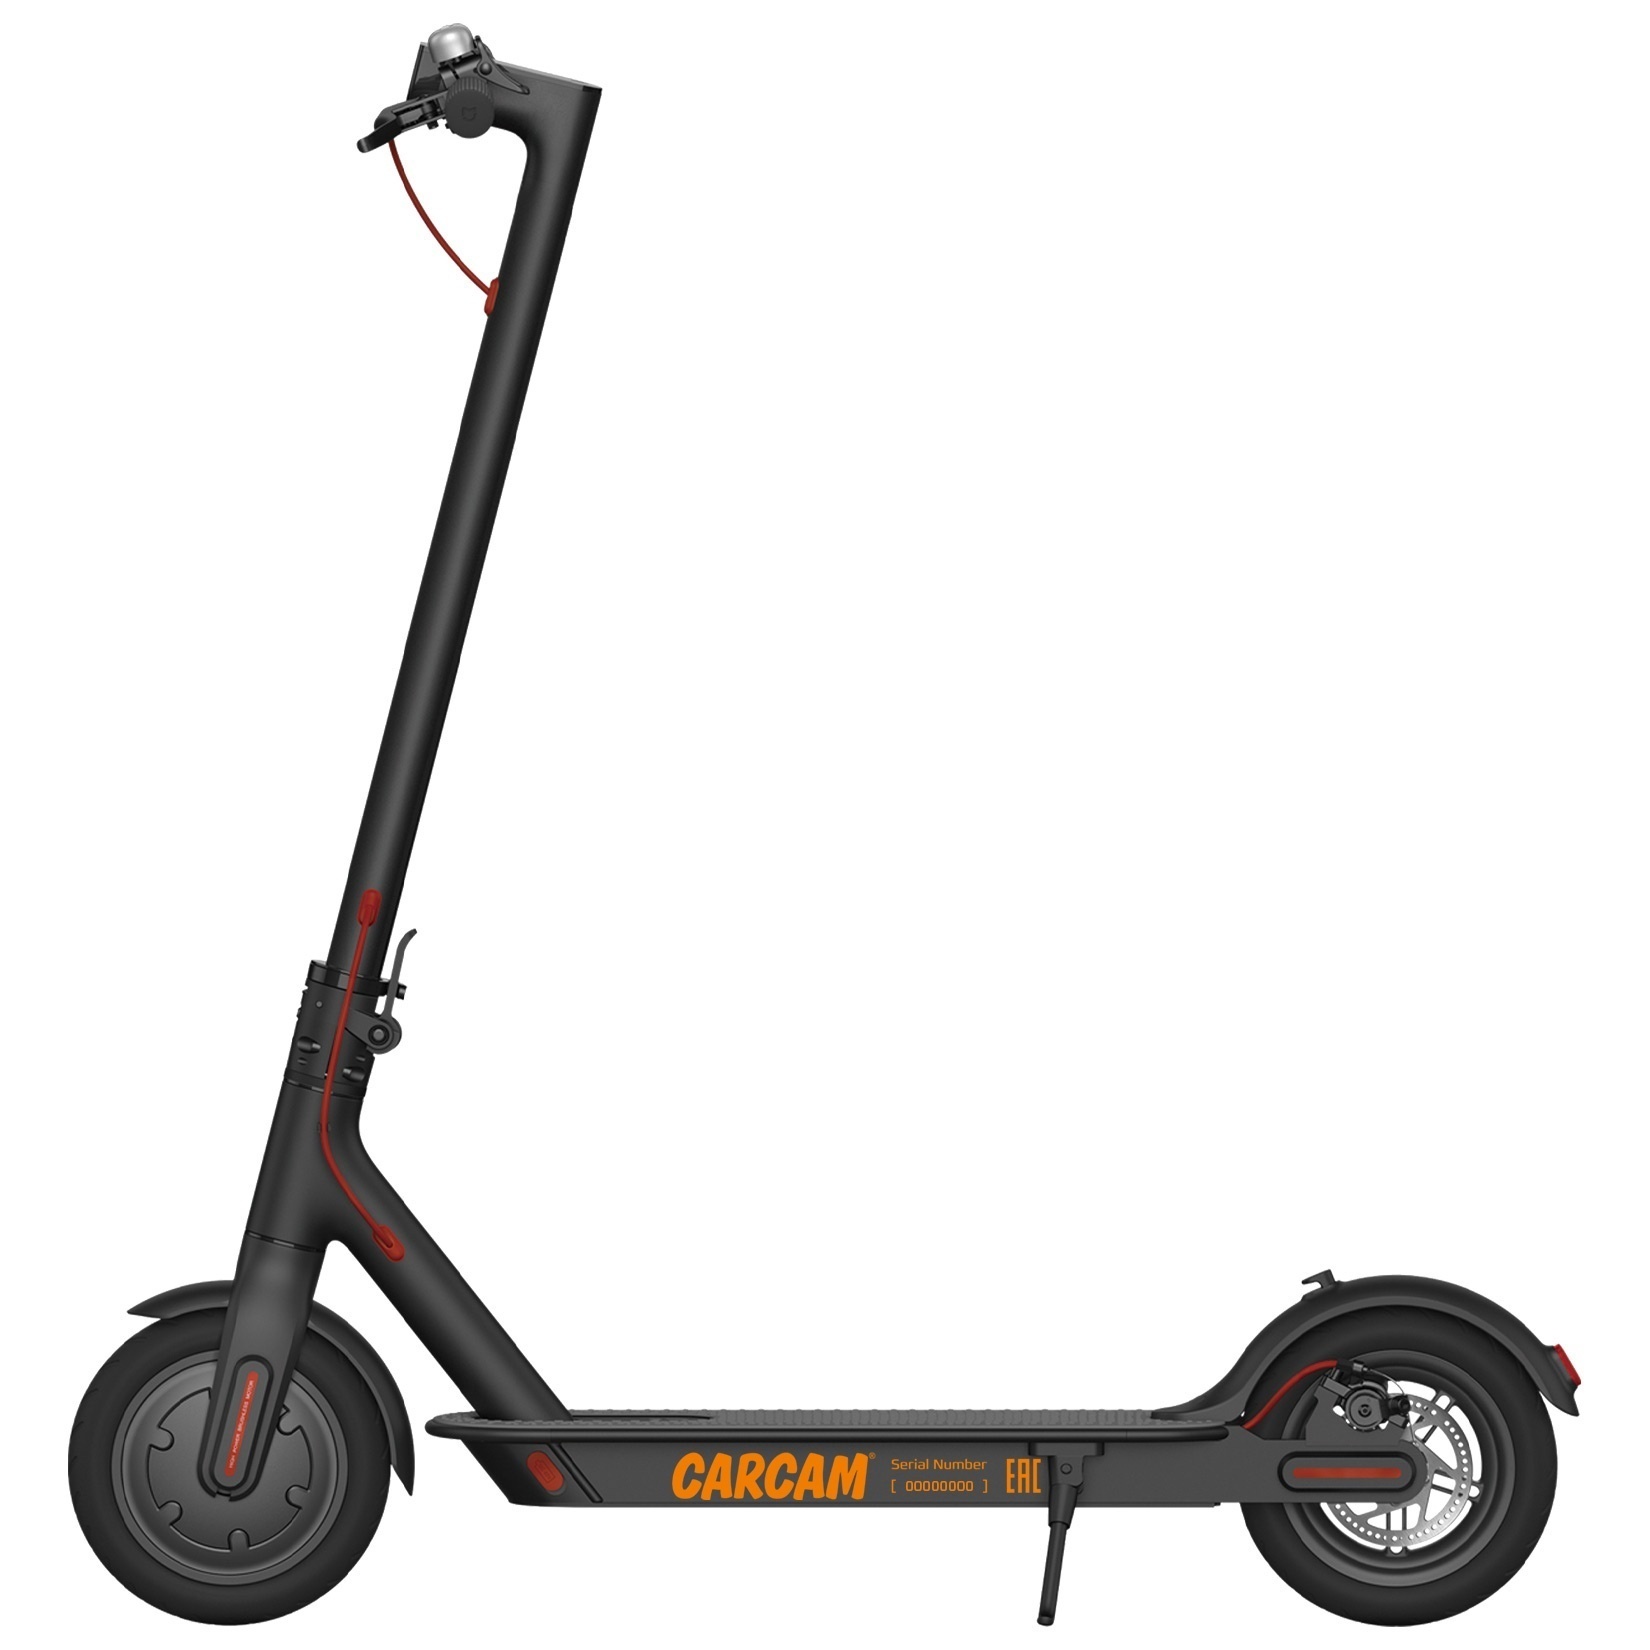 CARCAM ELECTRIC SCOOTER - BLACK КАРКАМ